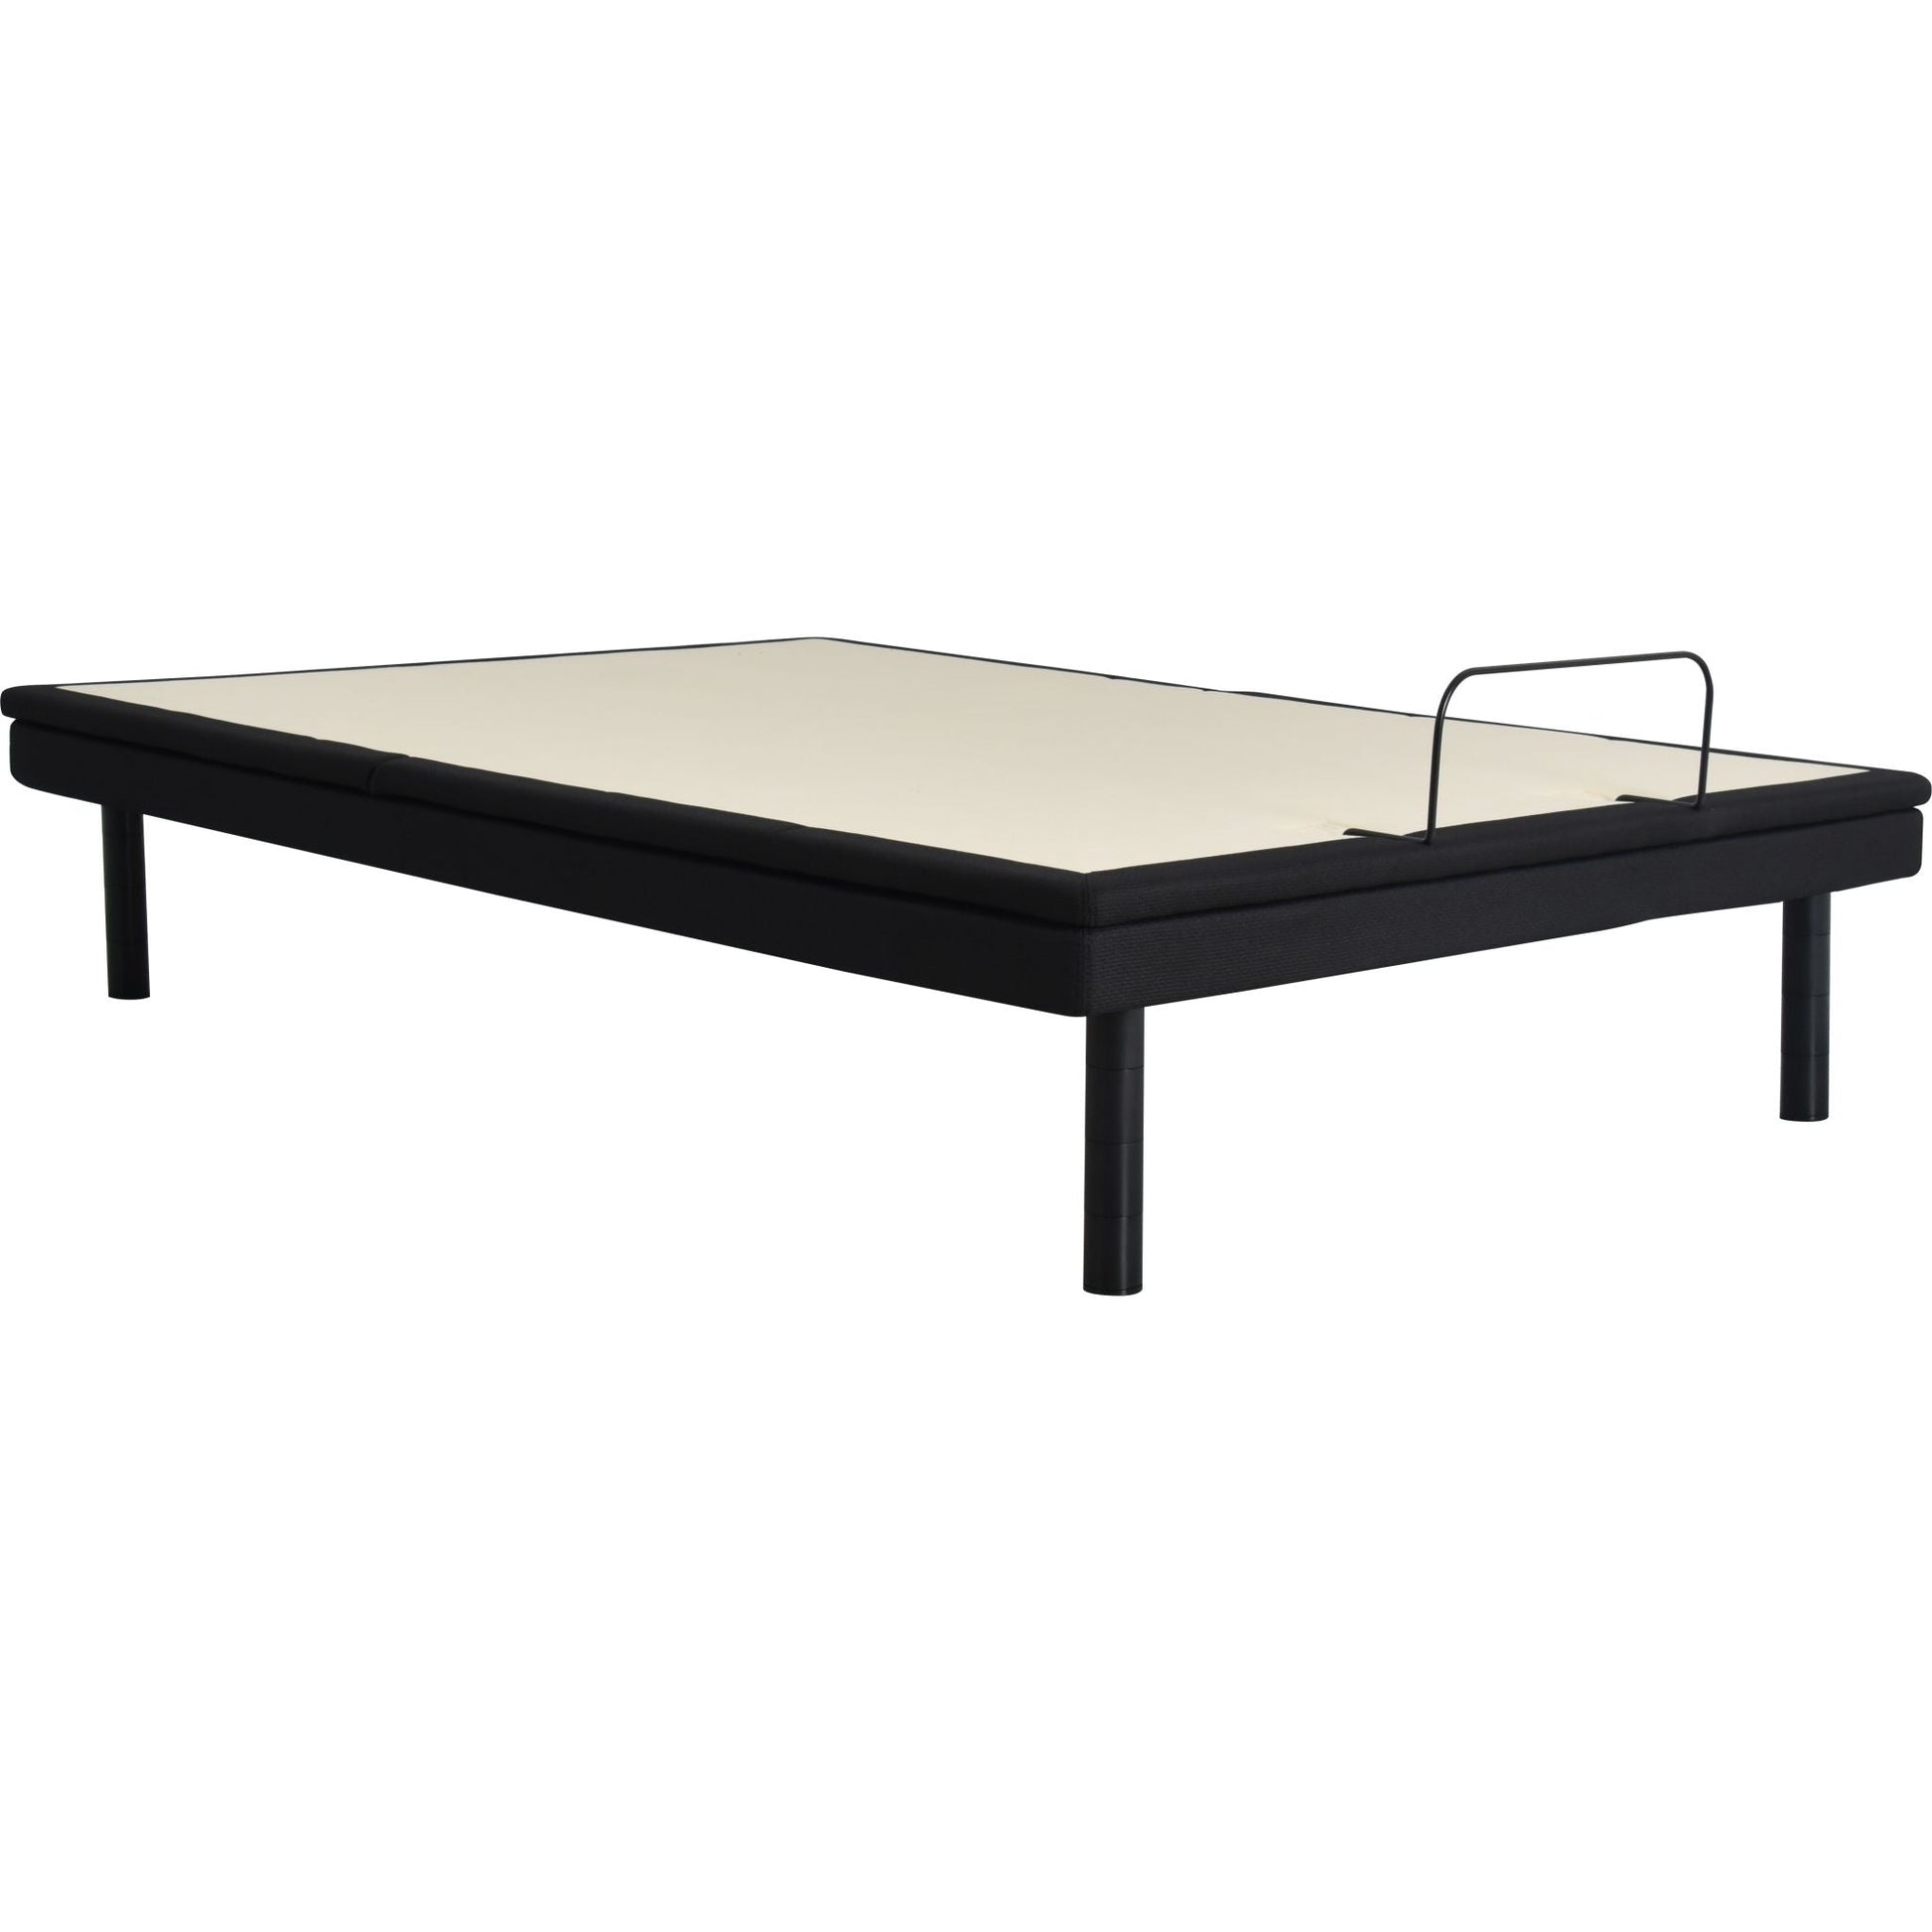 Sealy Reflexion® Arc Lifestyle Adjustable Bed